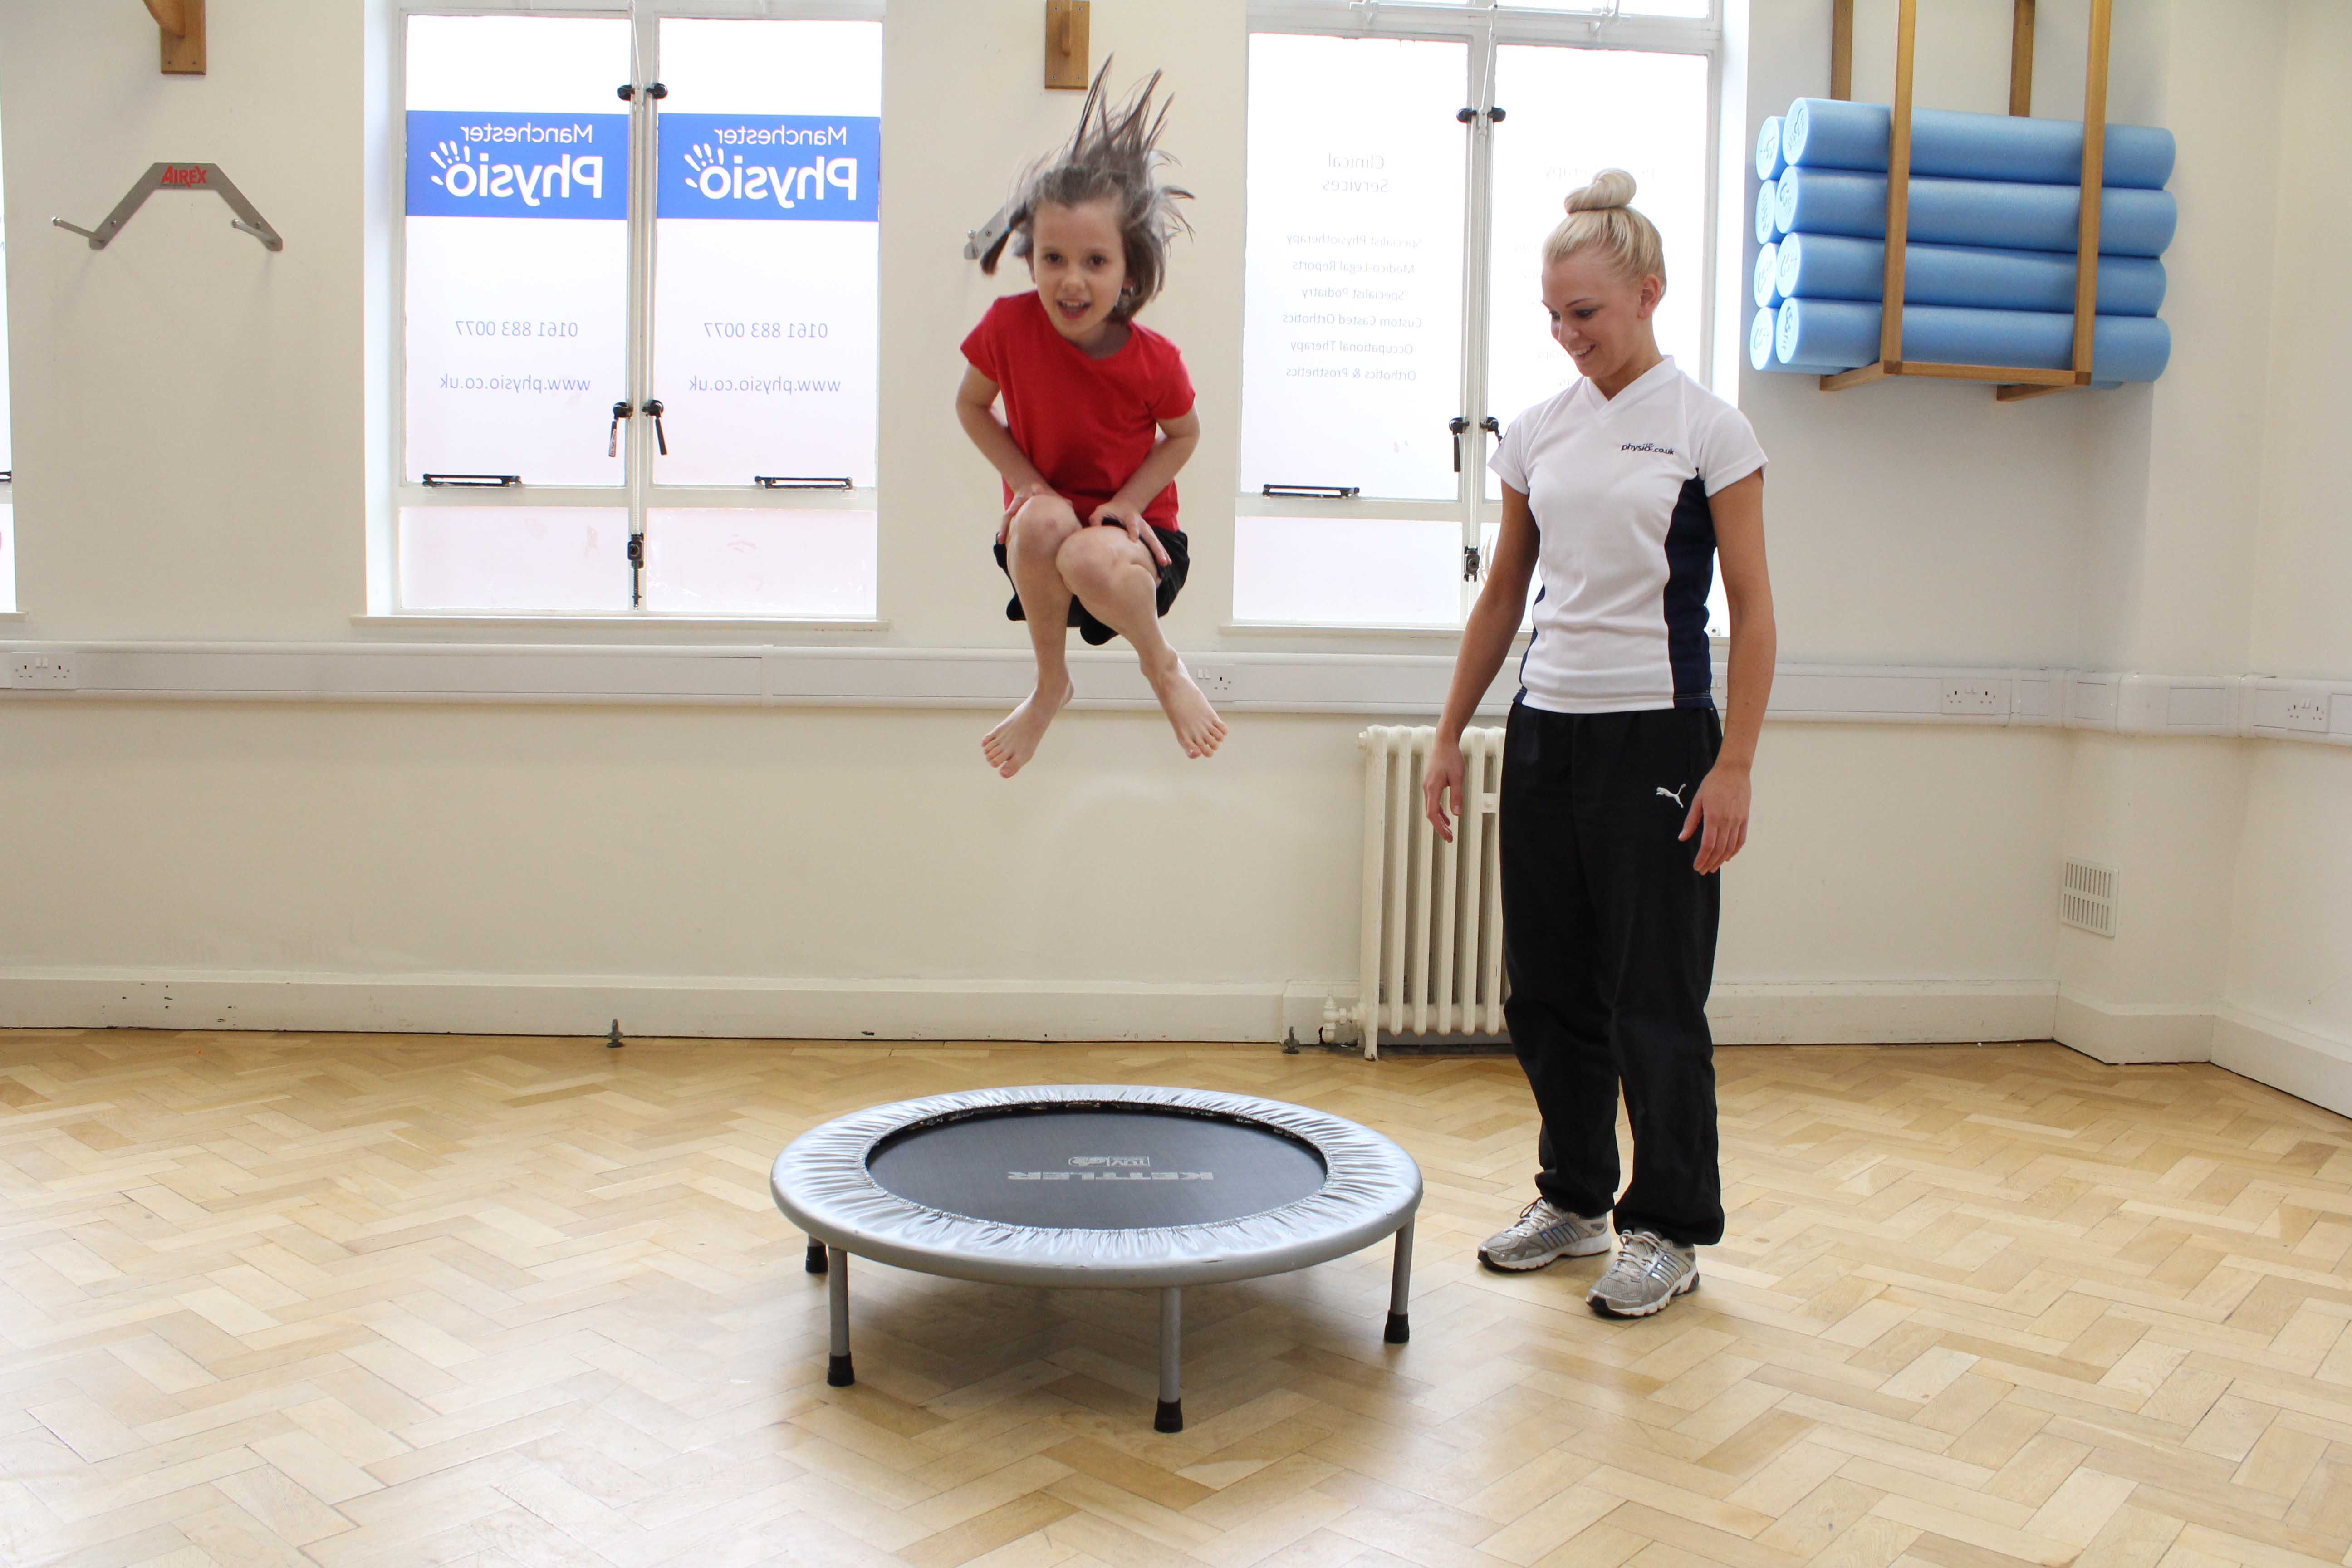 Rebound therapy under close supervision of paediatric physiotherapist